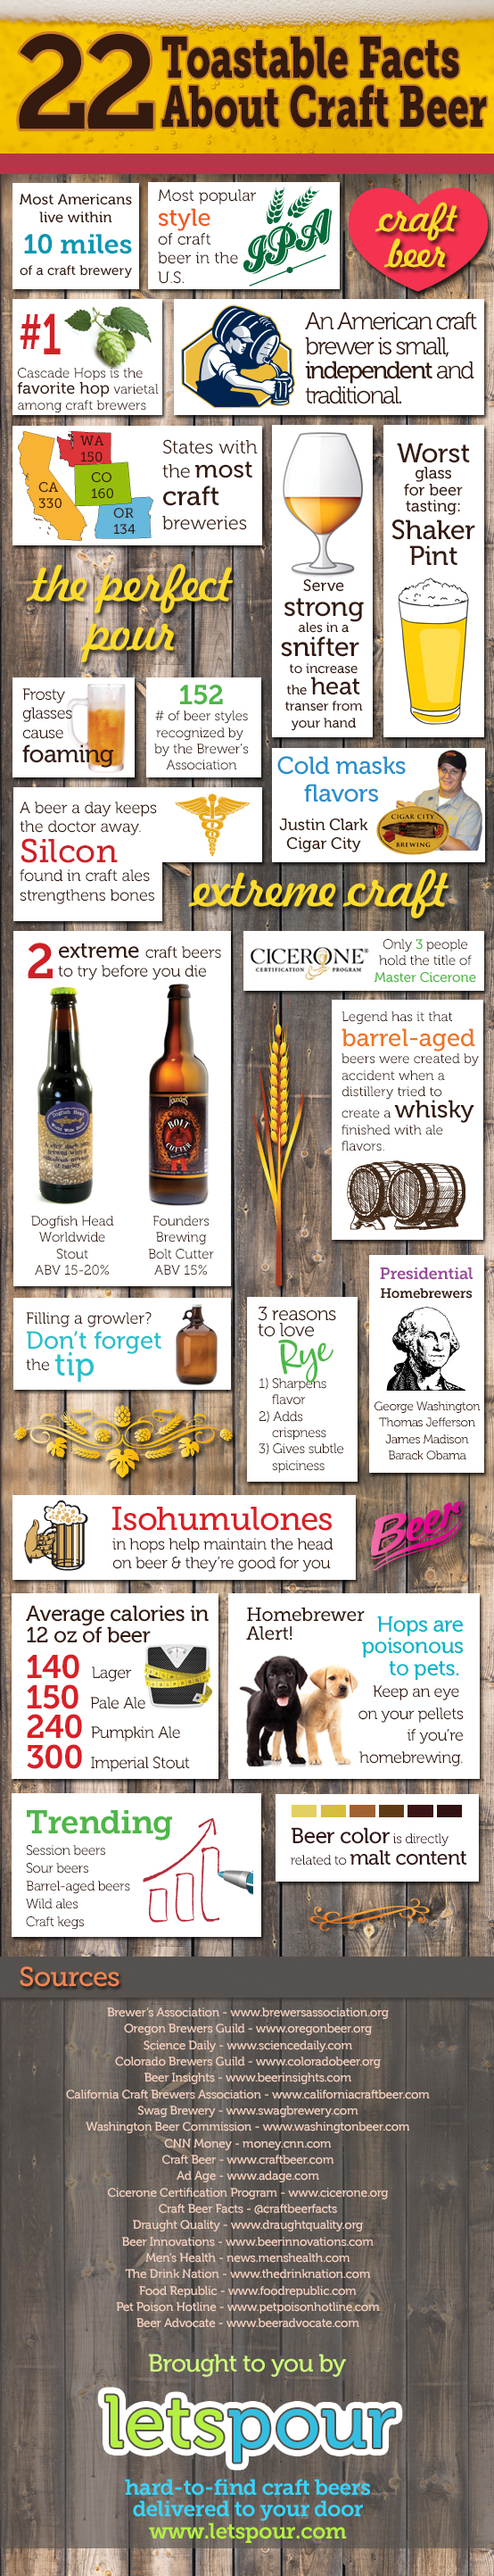 22-toastable-facts-beer-infographic